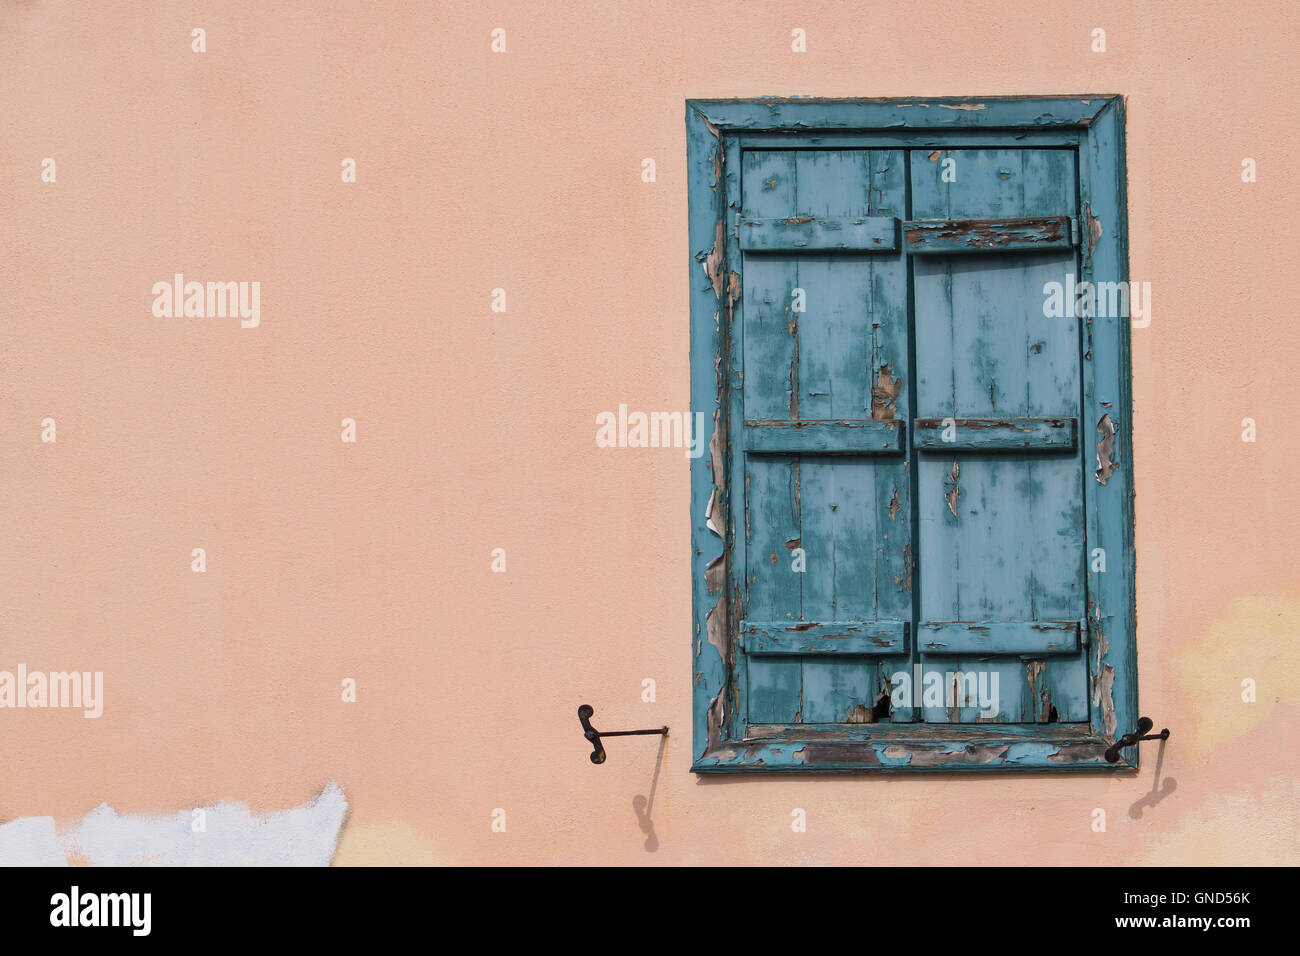 Enlightened light orange wall of a house with a window with an old wooden blue closed shutter. Plaka district of Athens, Greece. Stock Photo